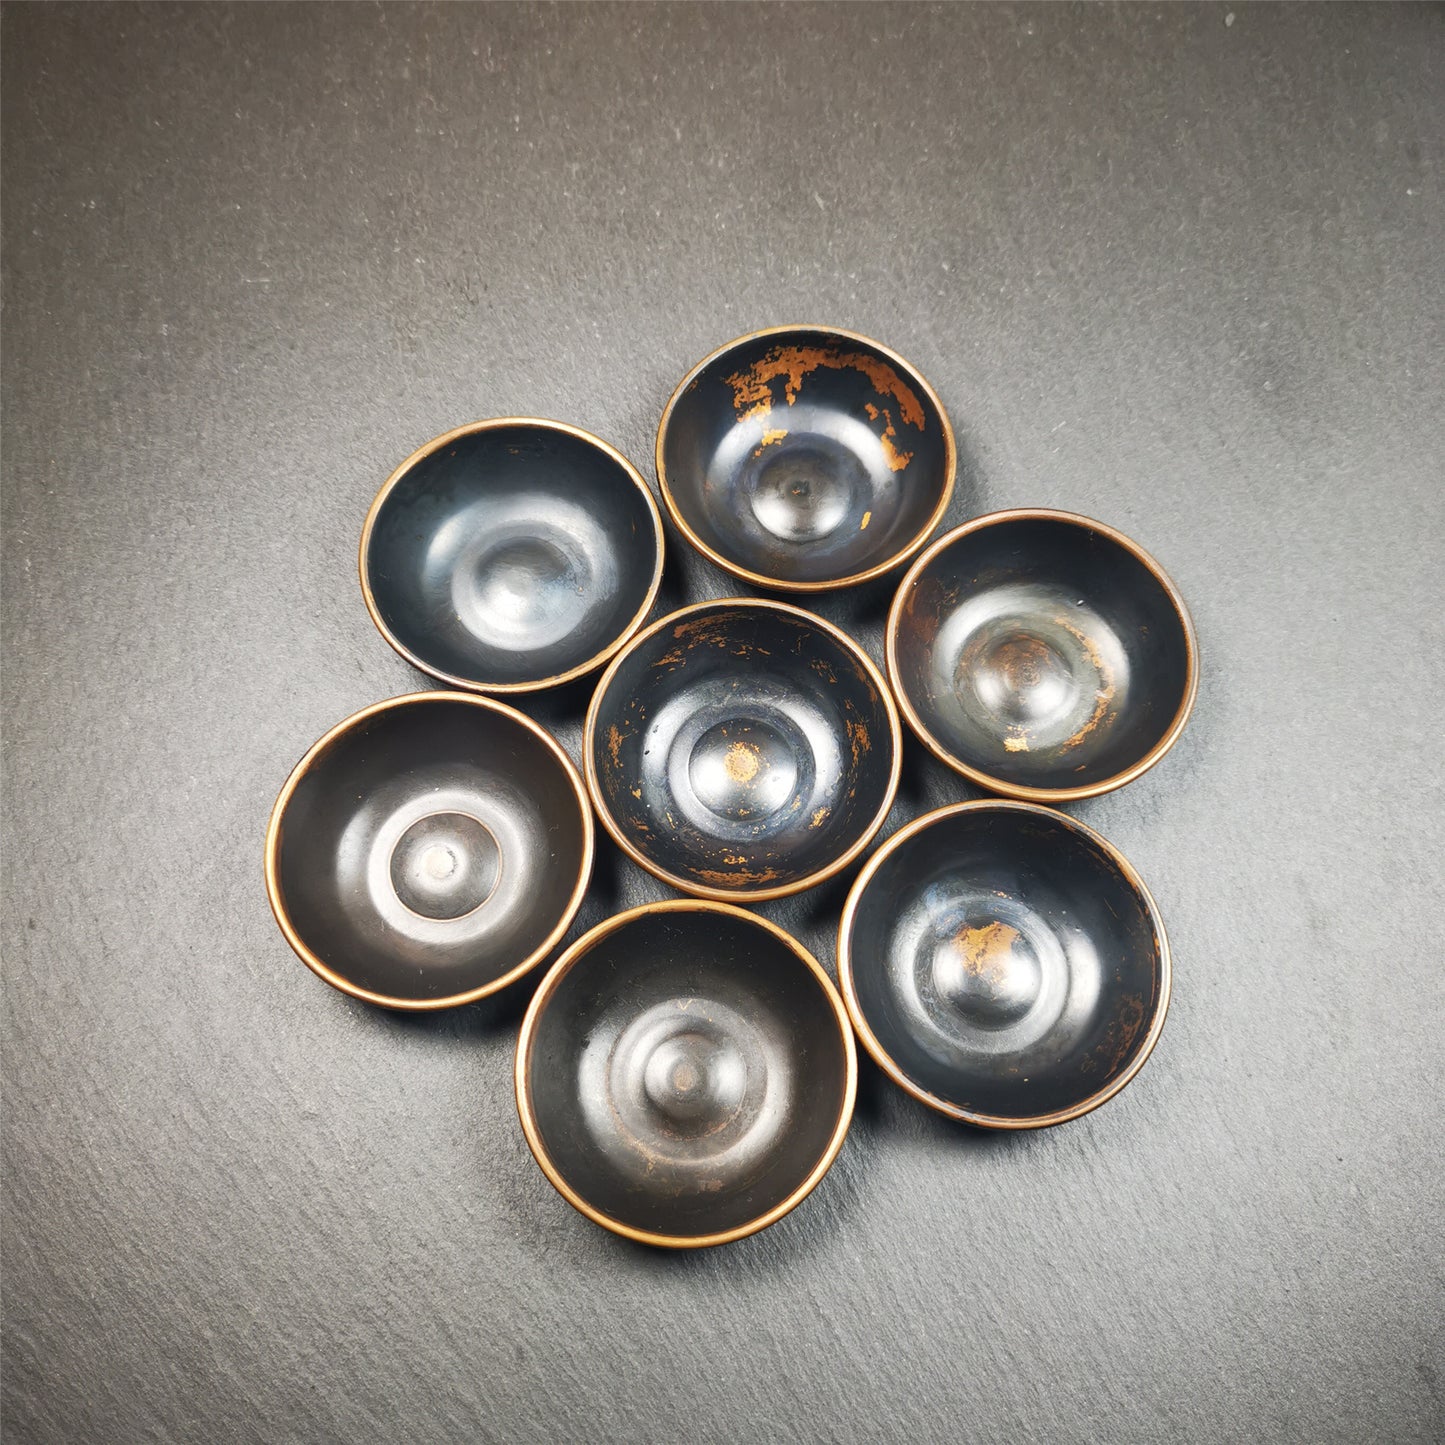 This set of tibetan water offering bowls are handmade by Tibetan craftsmen,it was made of copper,1.89 inch diameter, 0.6 inches height, You can put them in your shrine.